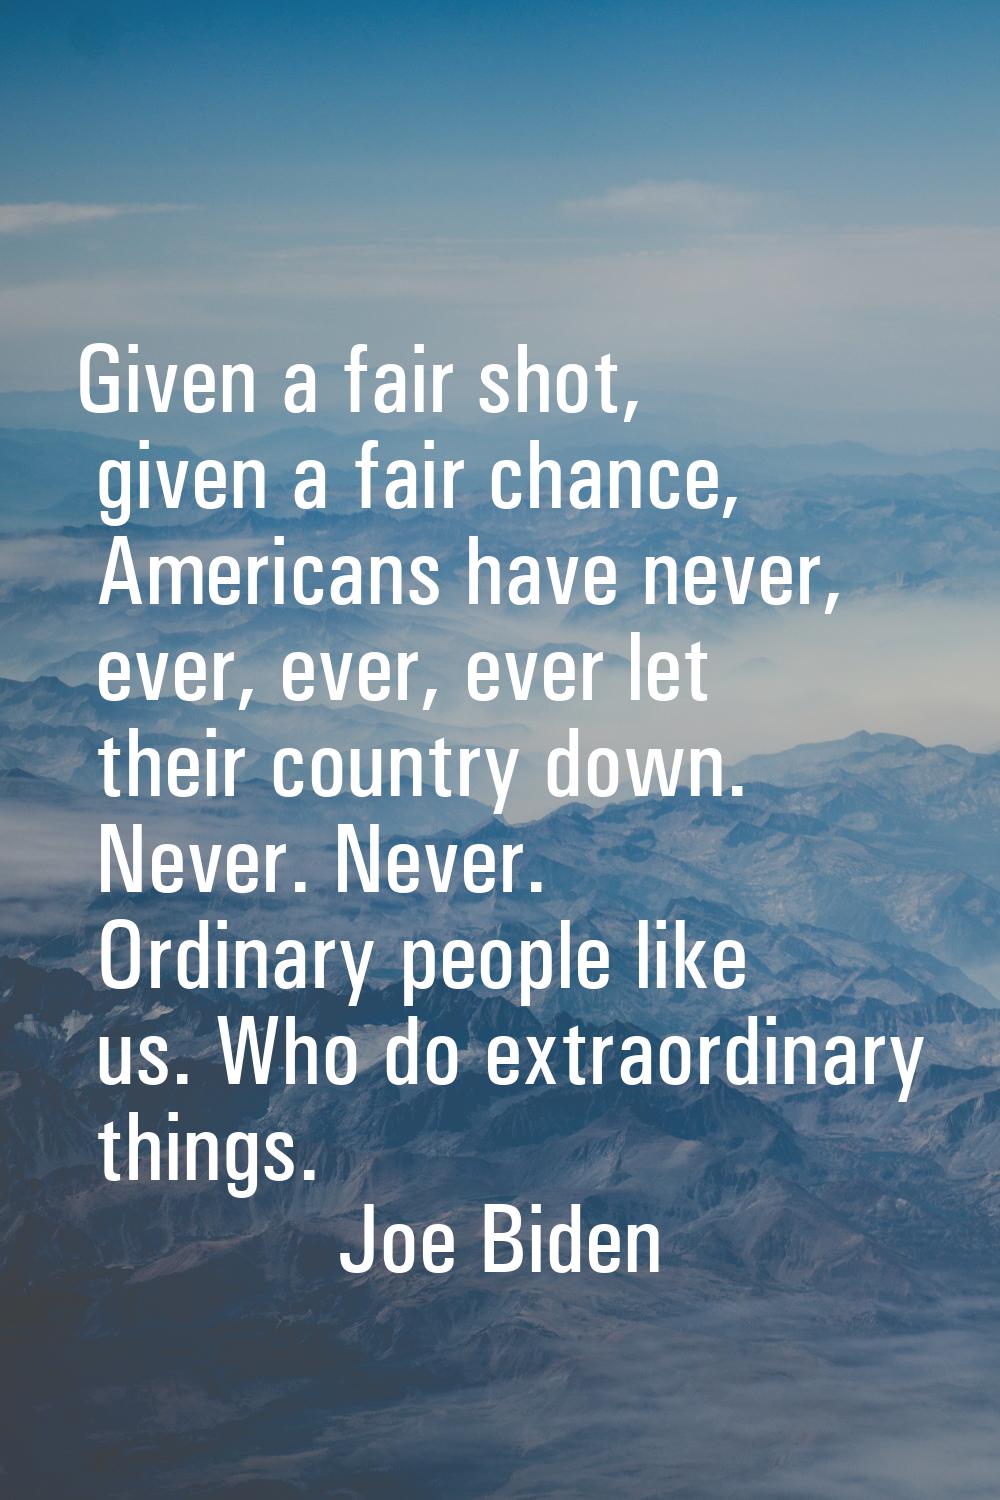 Given a fair shot, given a fair chance, Americans have never, ever, ever, ever let their country do